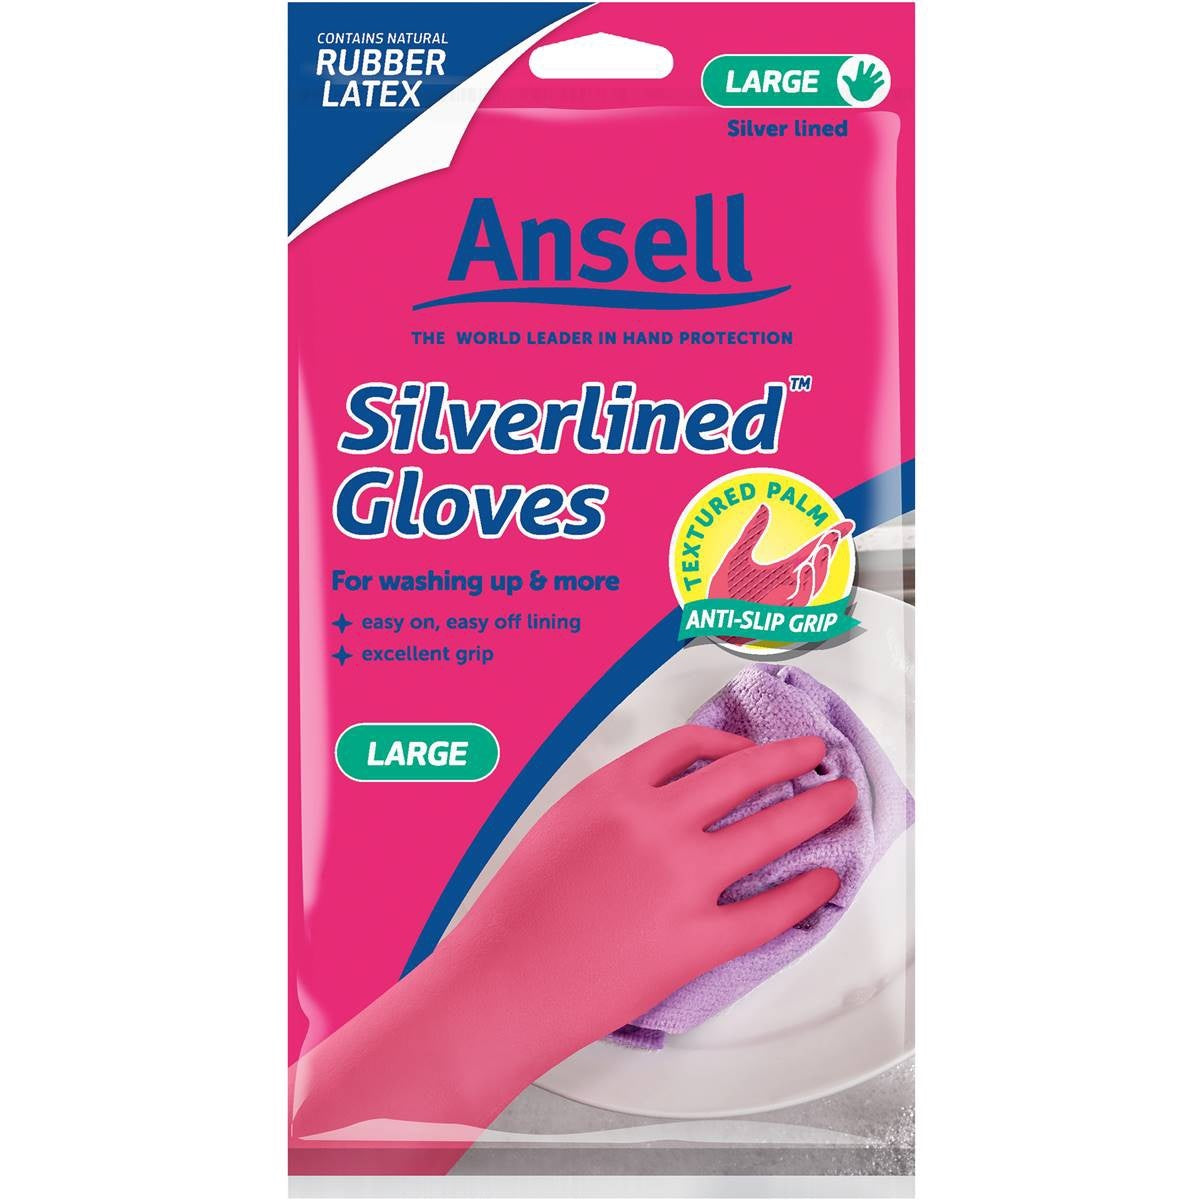 Ansell Silverlined Gloves Large 1pr